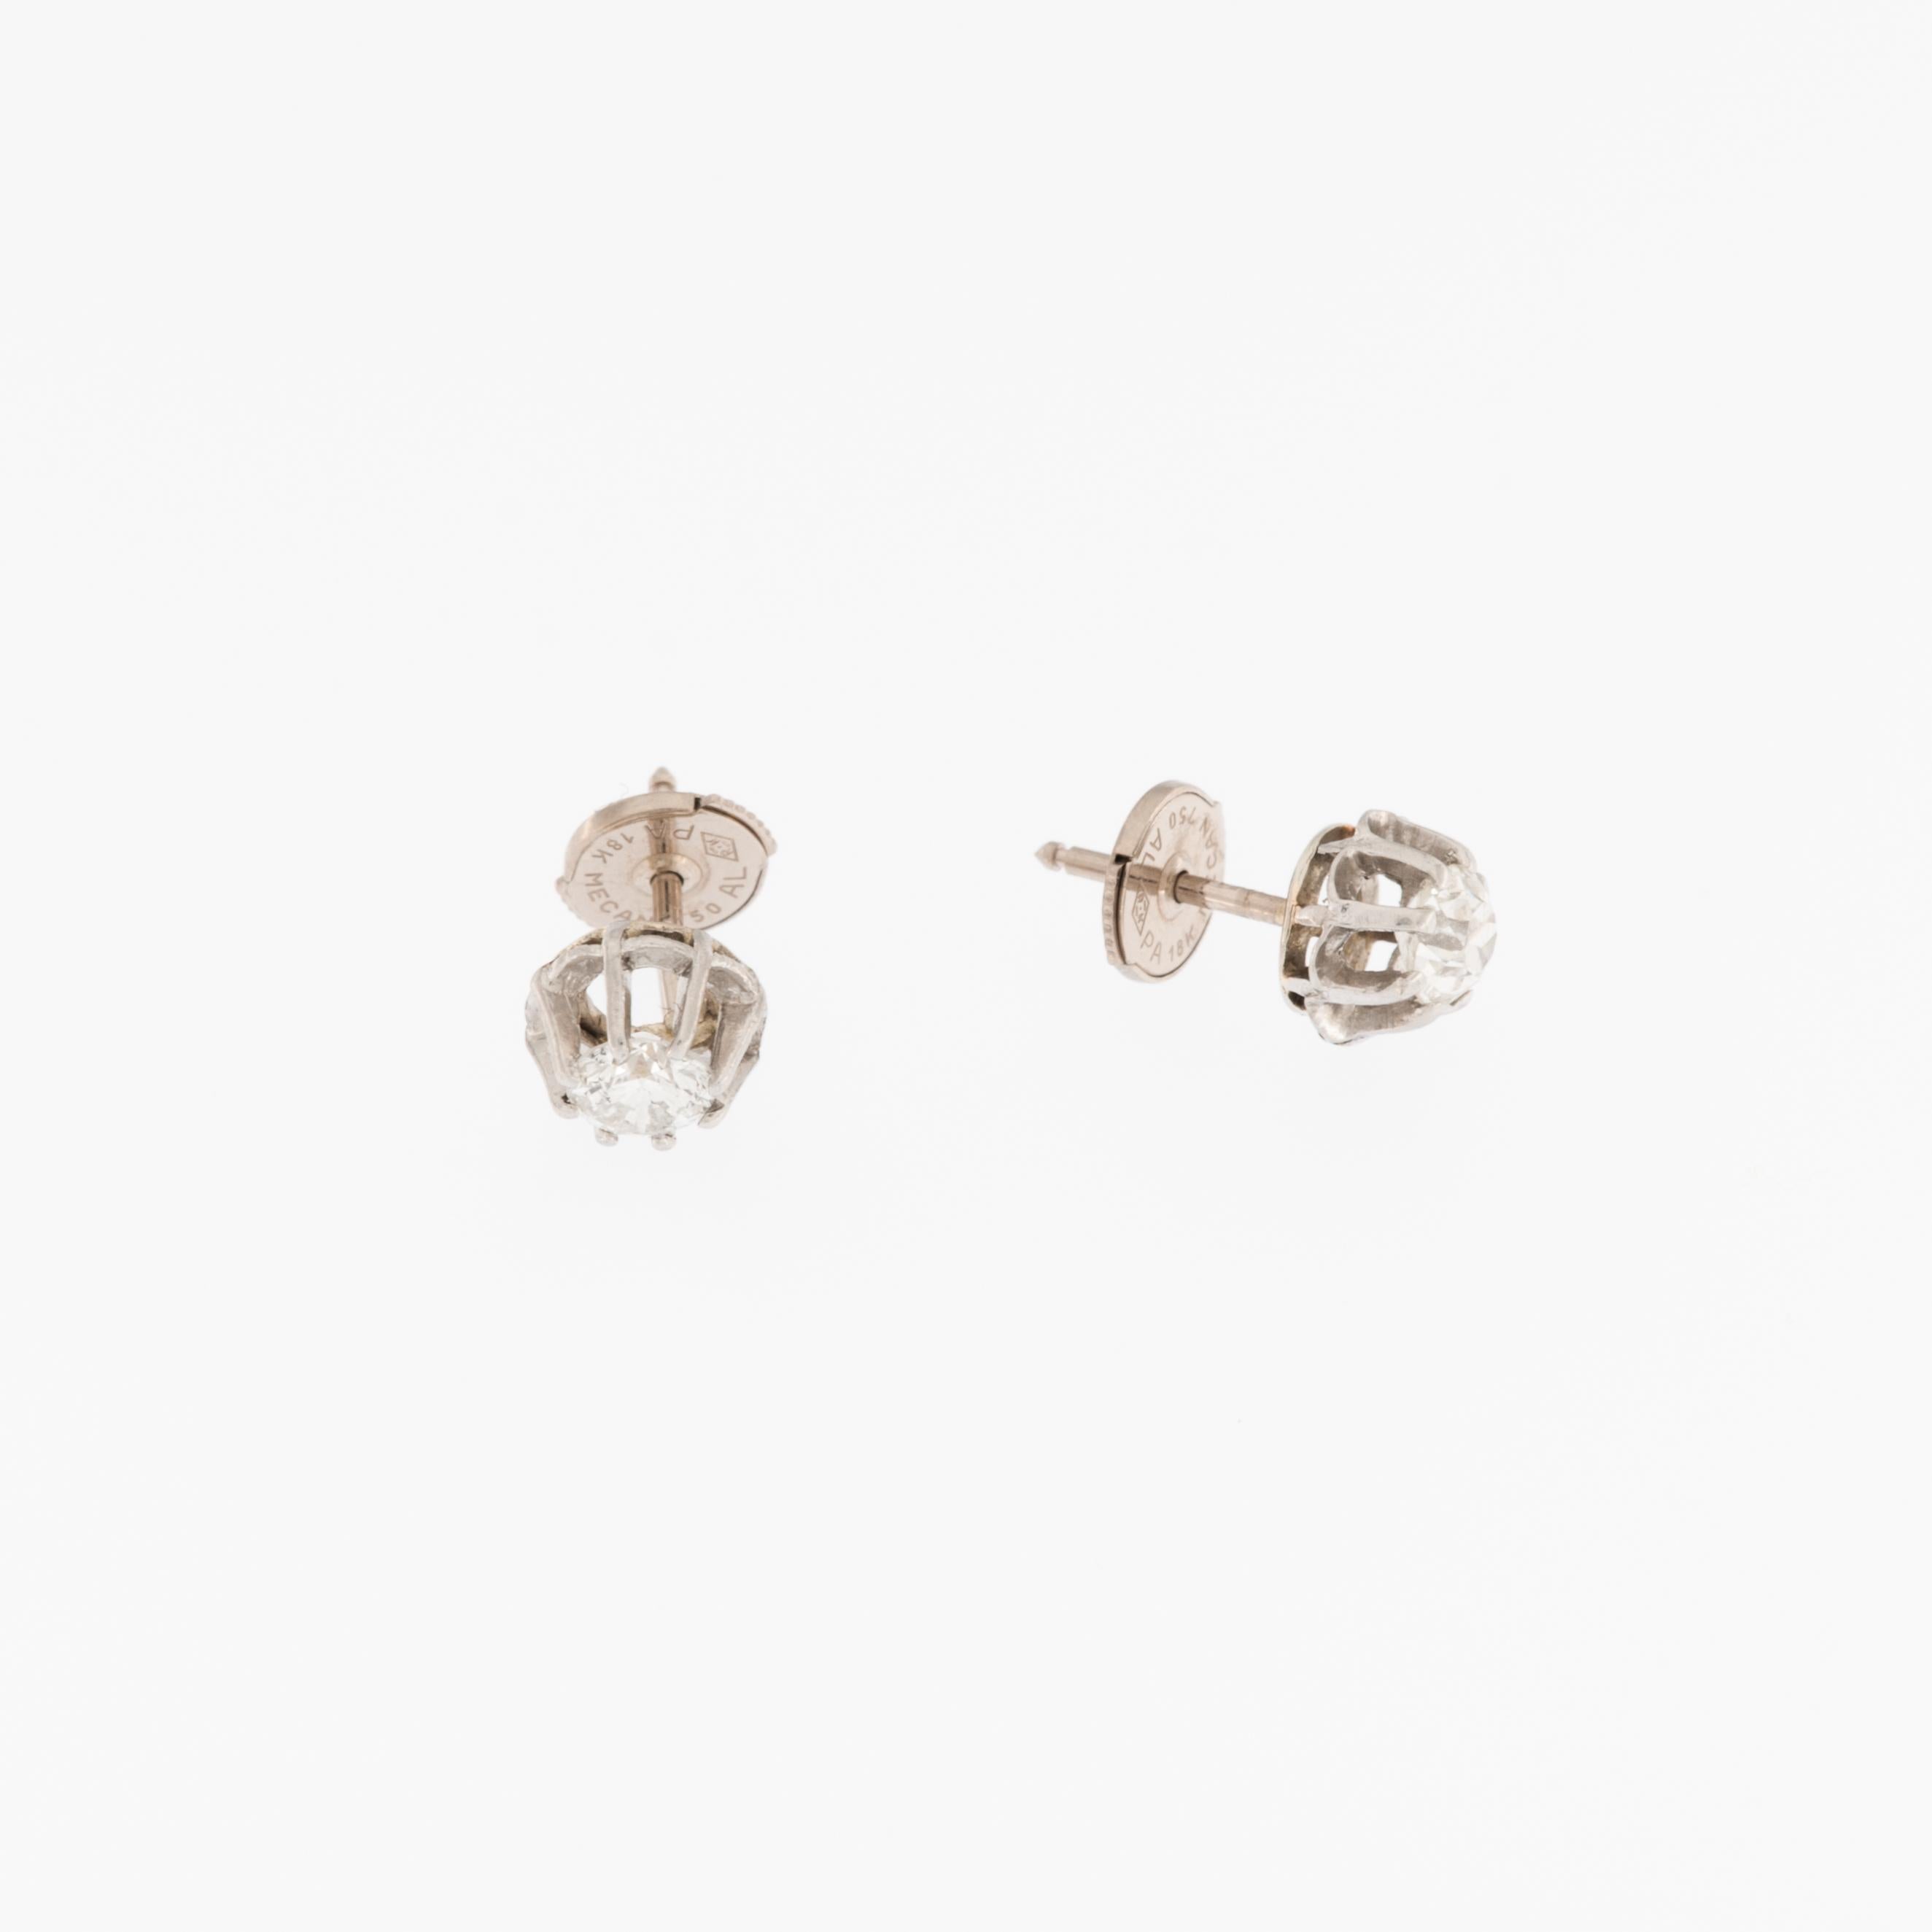 The Italian Vintage 18kt White Gold Solitaire Earrings are a stunning and timeless jewelry piece that exudes elegance and sophistication. 

These earrings are crafted from 18-karat white gold, known for its lustrous, silvery-white appearance and